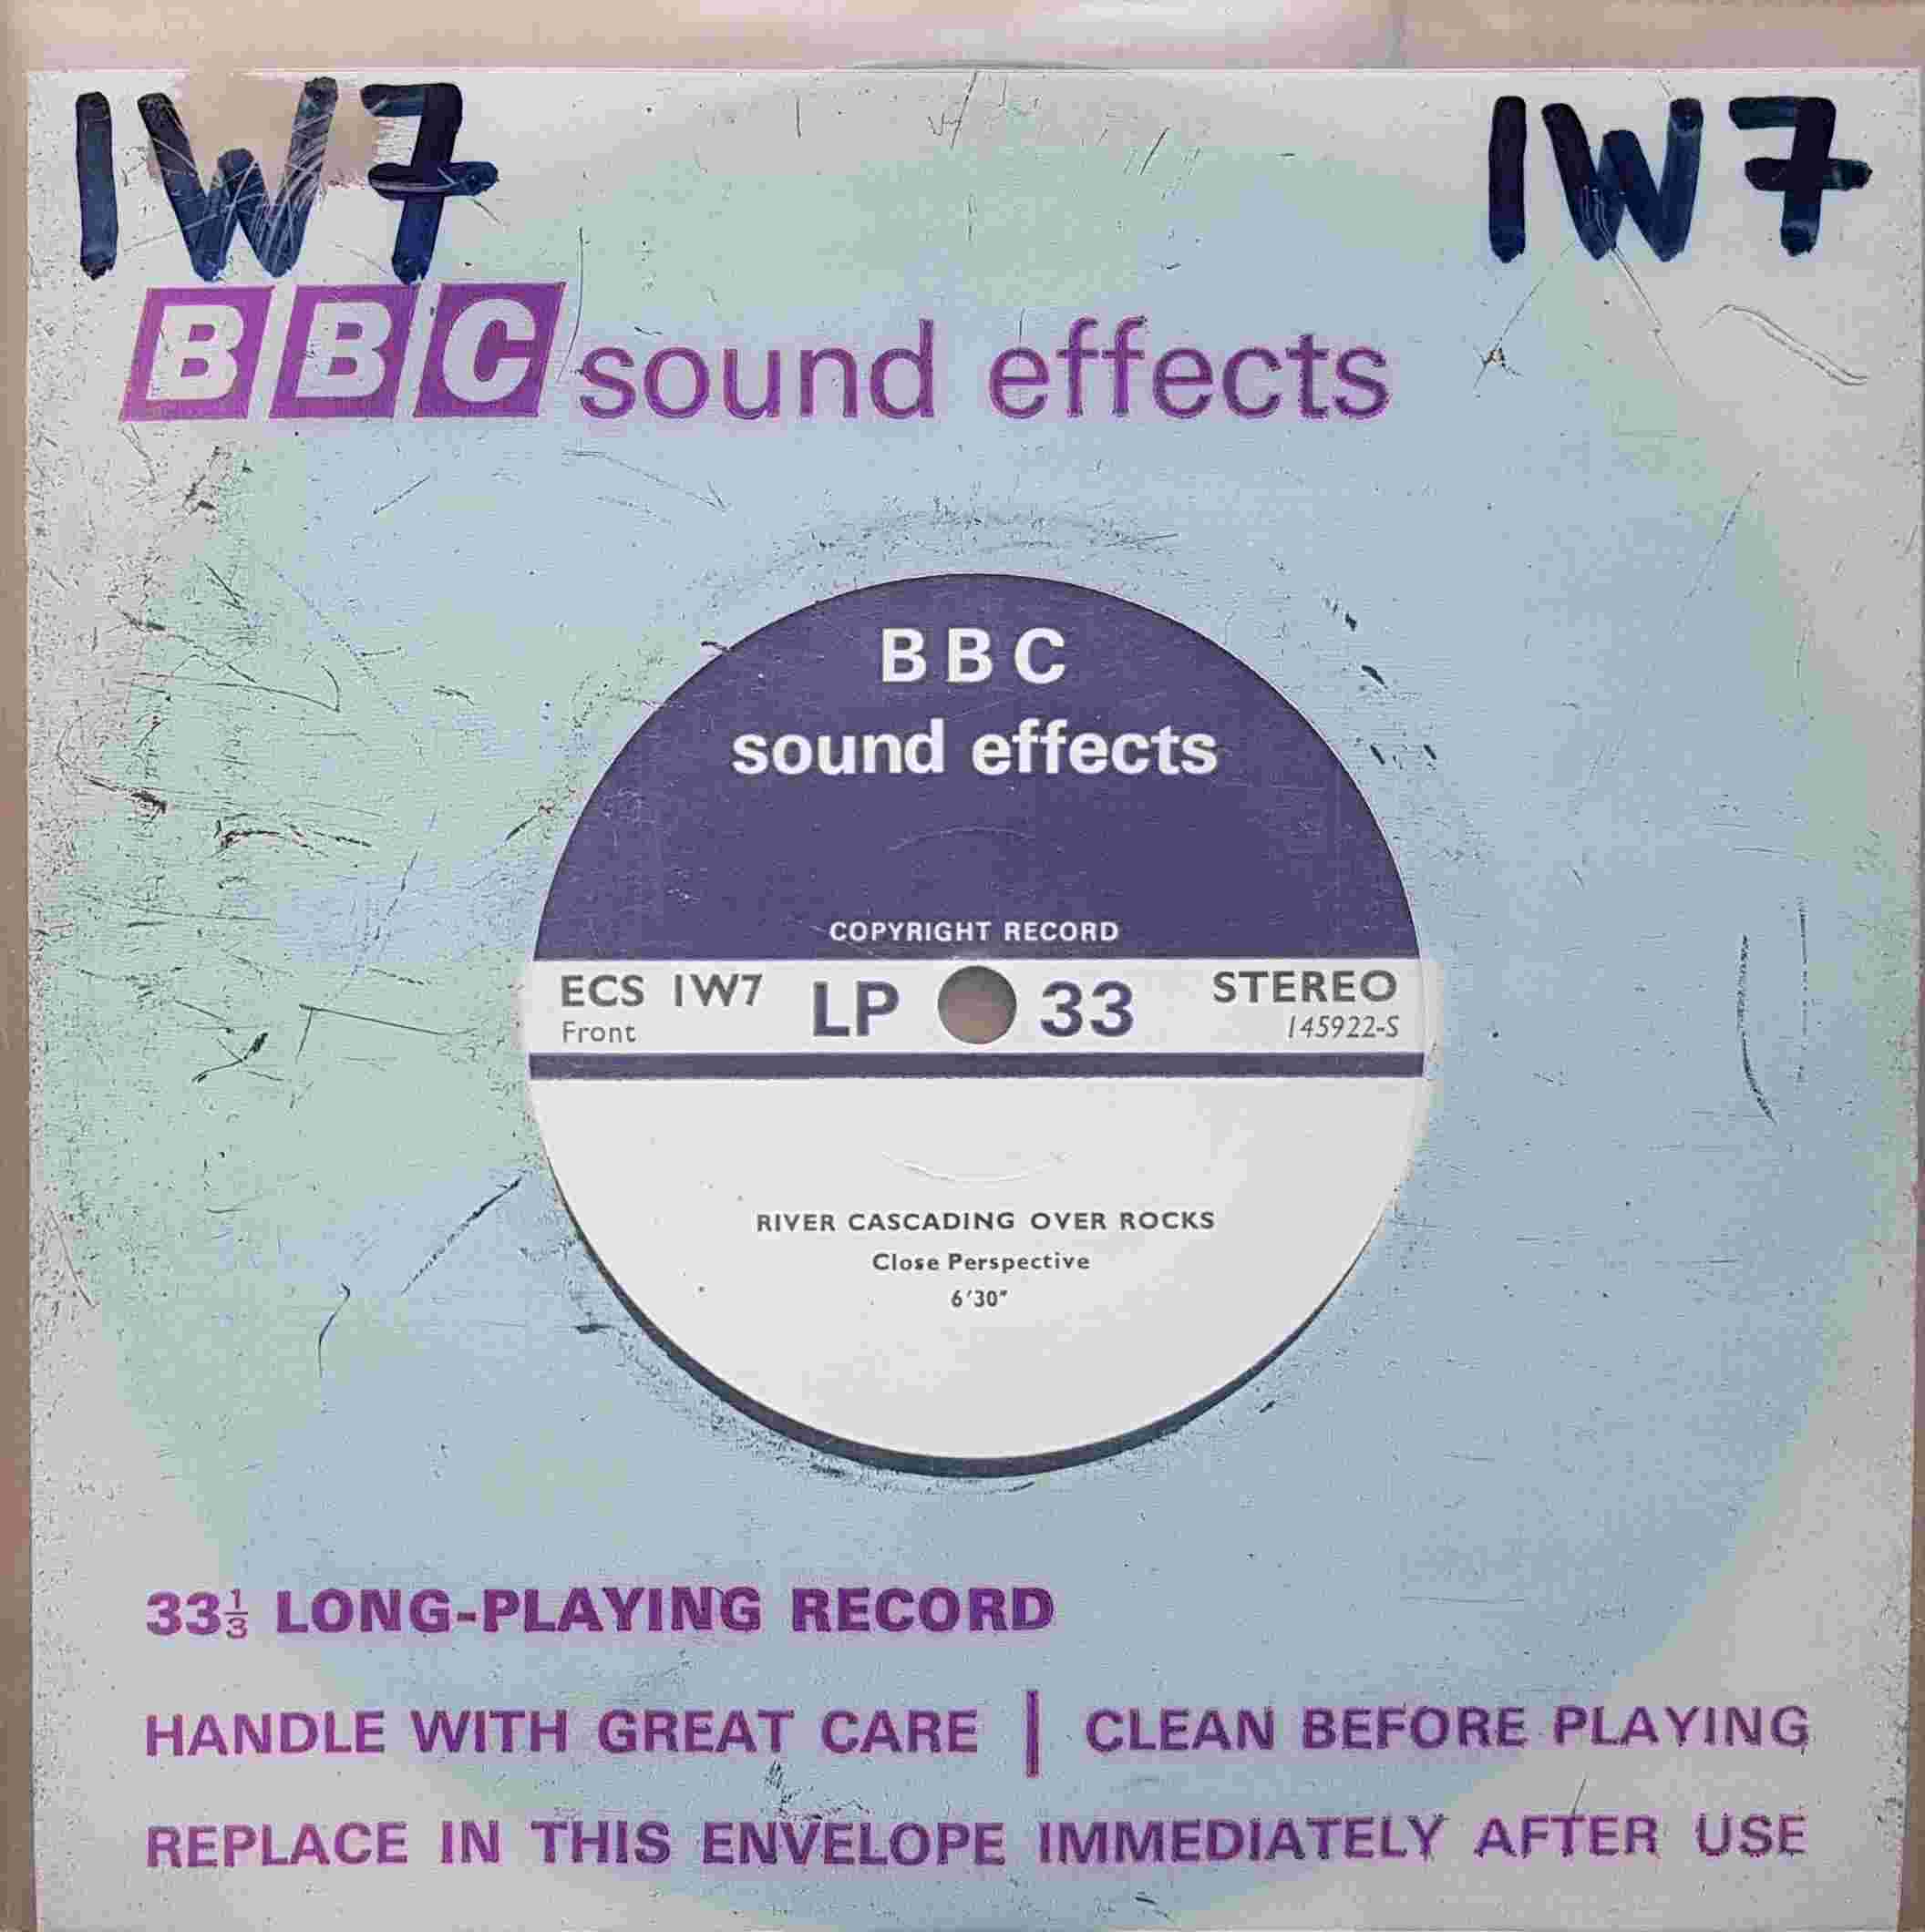 Picture of ECS 1W7 River cascading over rocks / Waterfall by artist Not registered from the BBC singles - Records and Tapes library